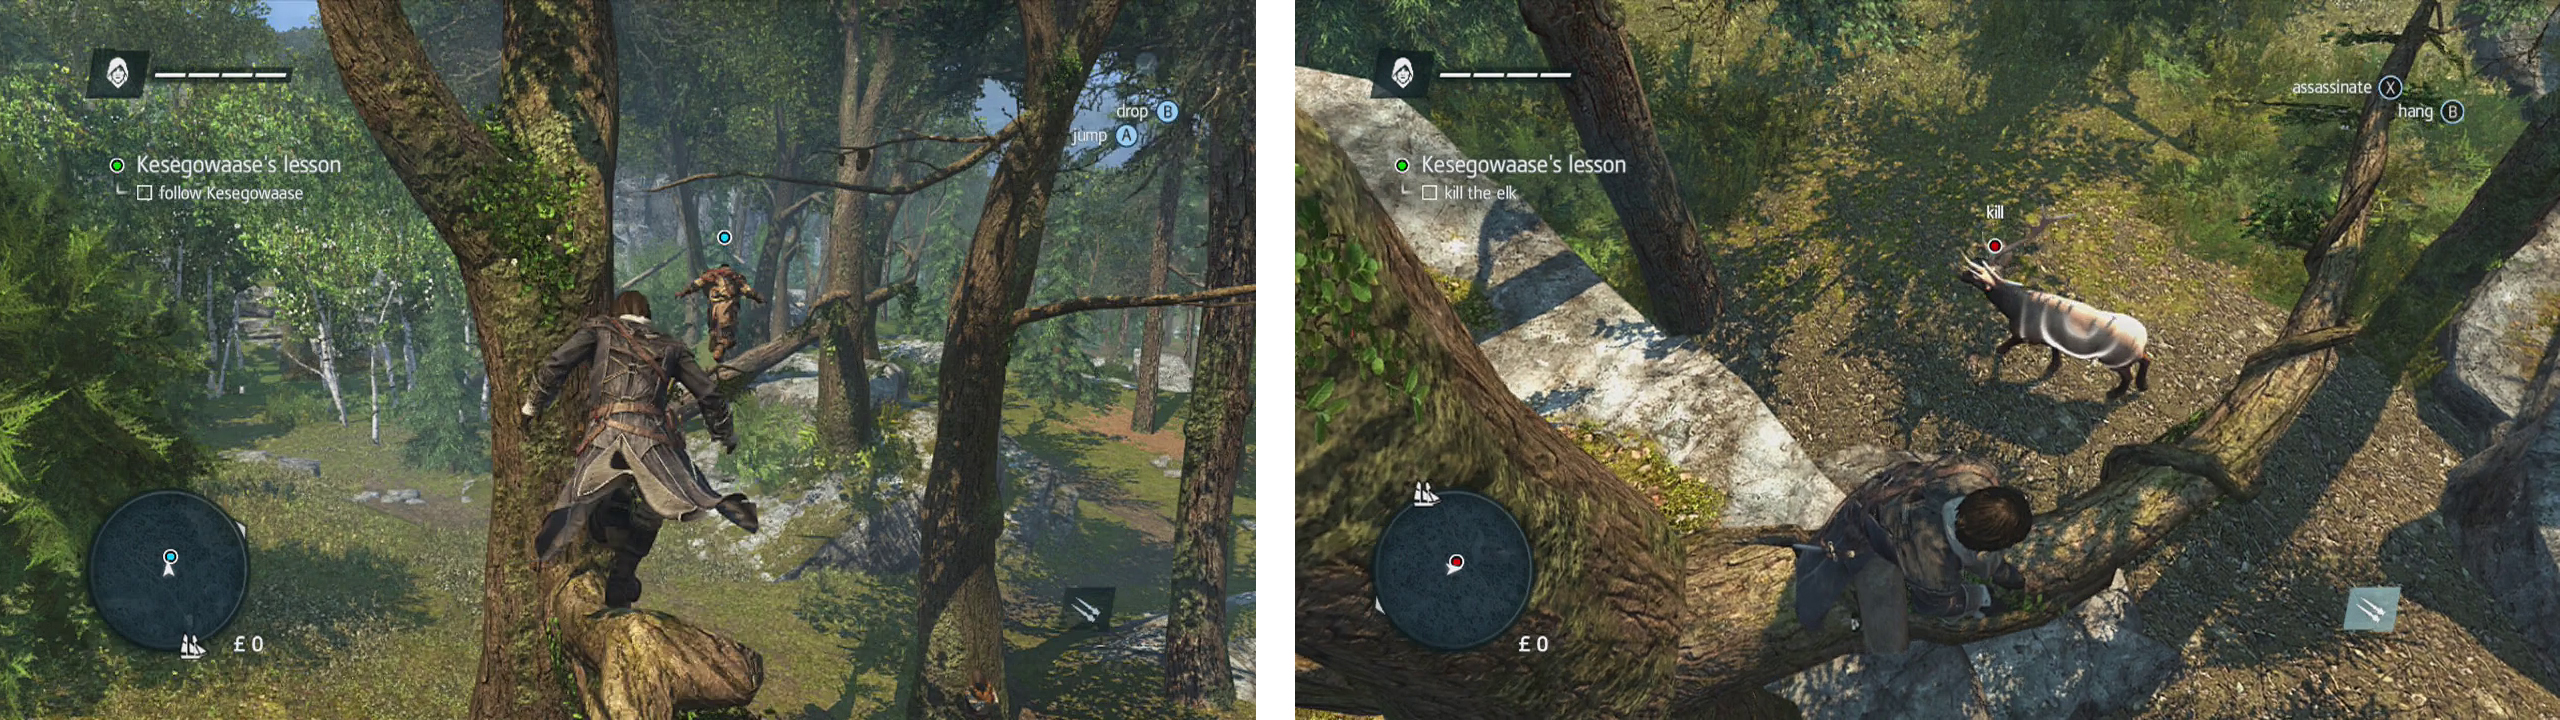 Follow Kesegowaase (left) until you reach the hunting area. Air assassinate the elk (right).